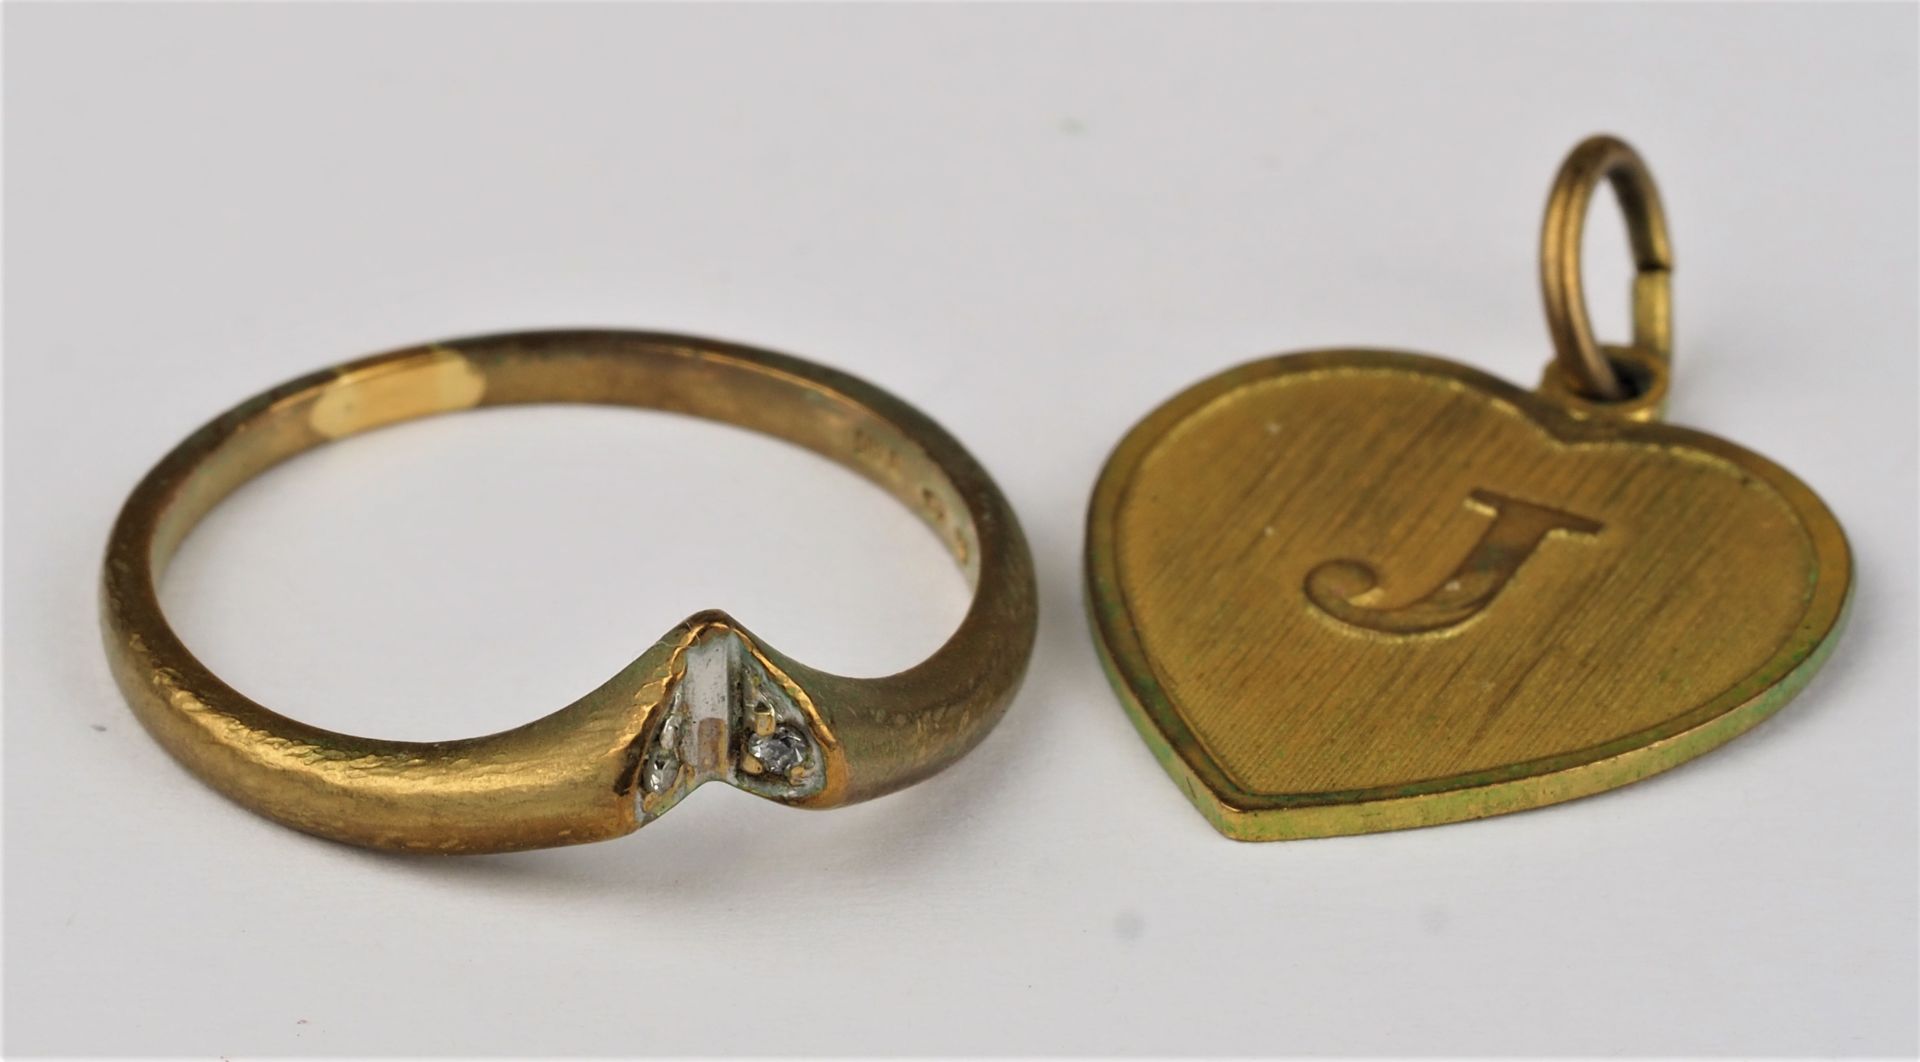 2 parts jewelry, pendant "J" + ring, 8kt gold.